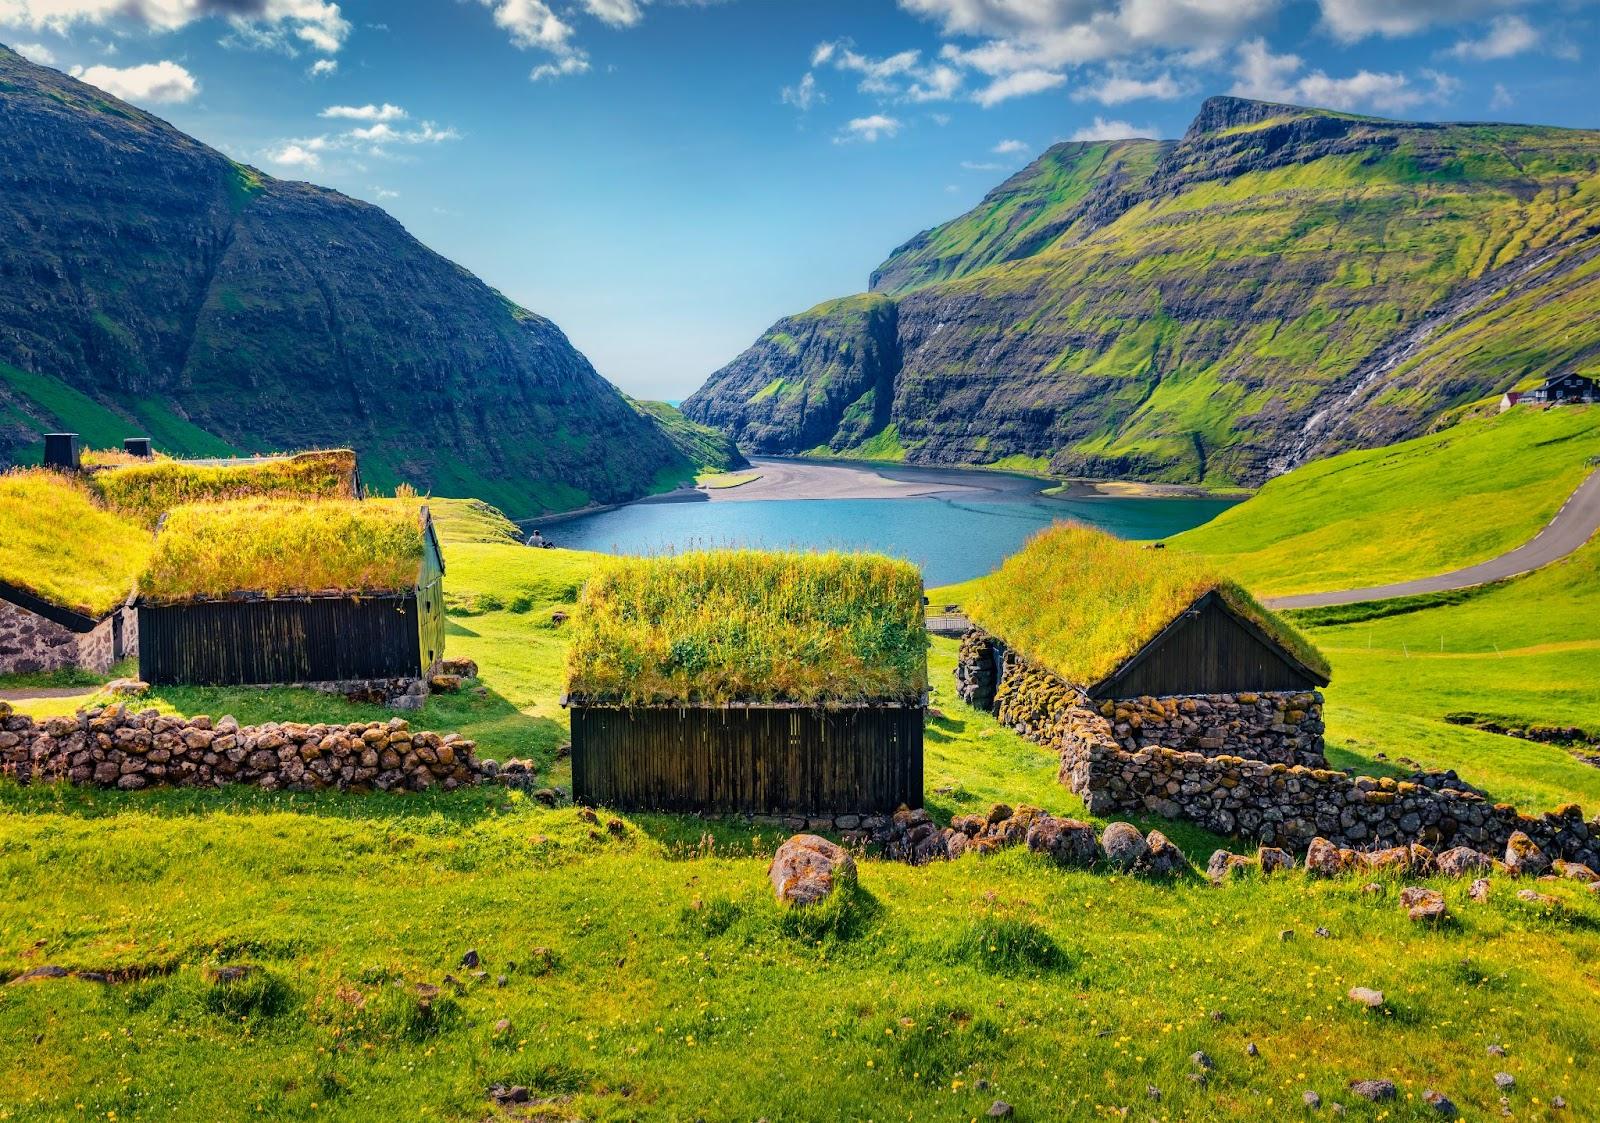 Grass roofed houses over looking a Danish valley with a lake at the bottom.